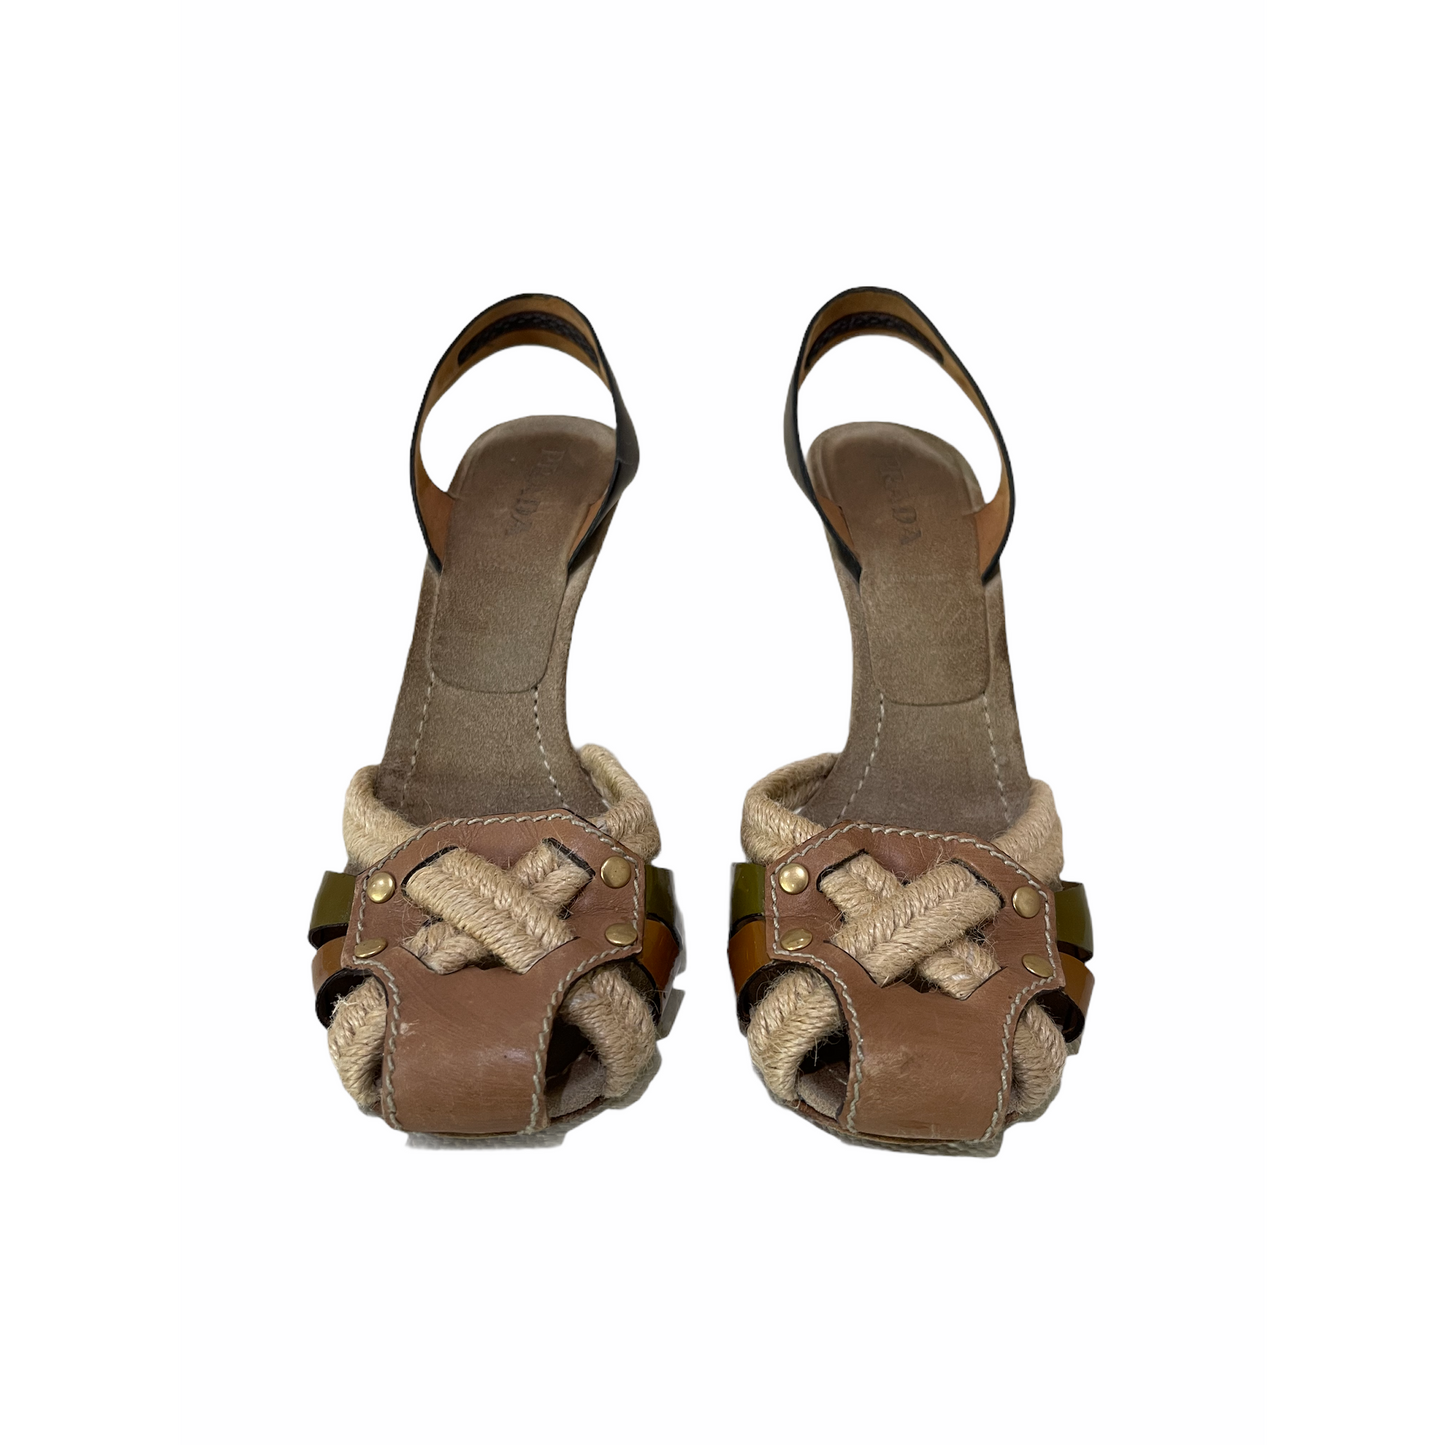 Heels-Leather Material- Woven Pattern - By Prada